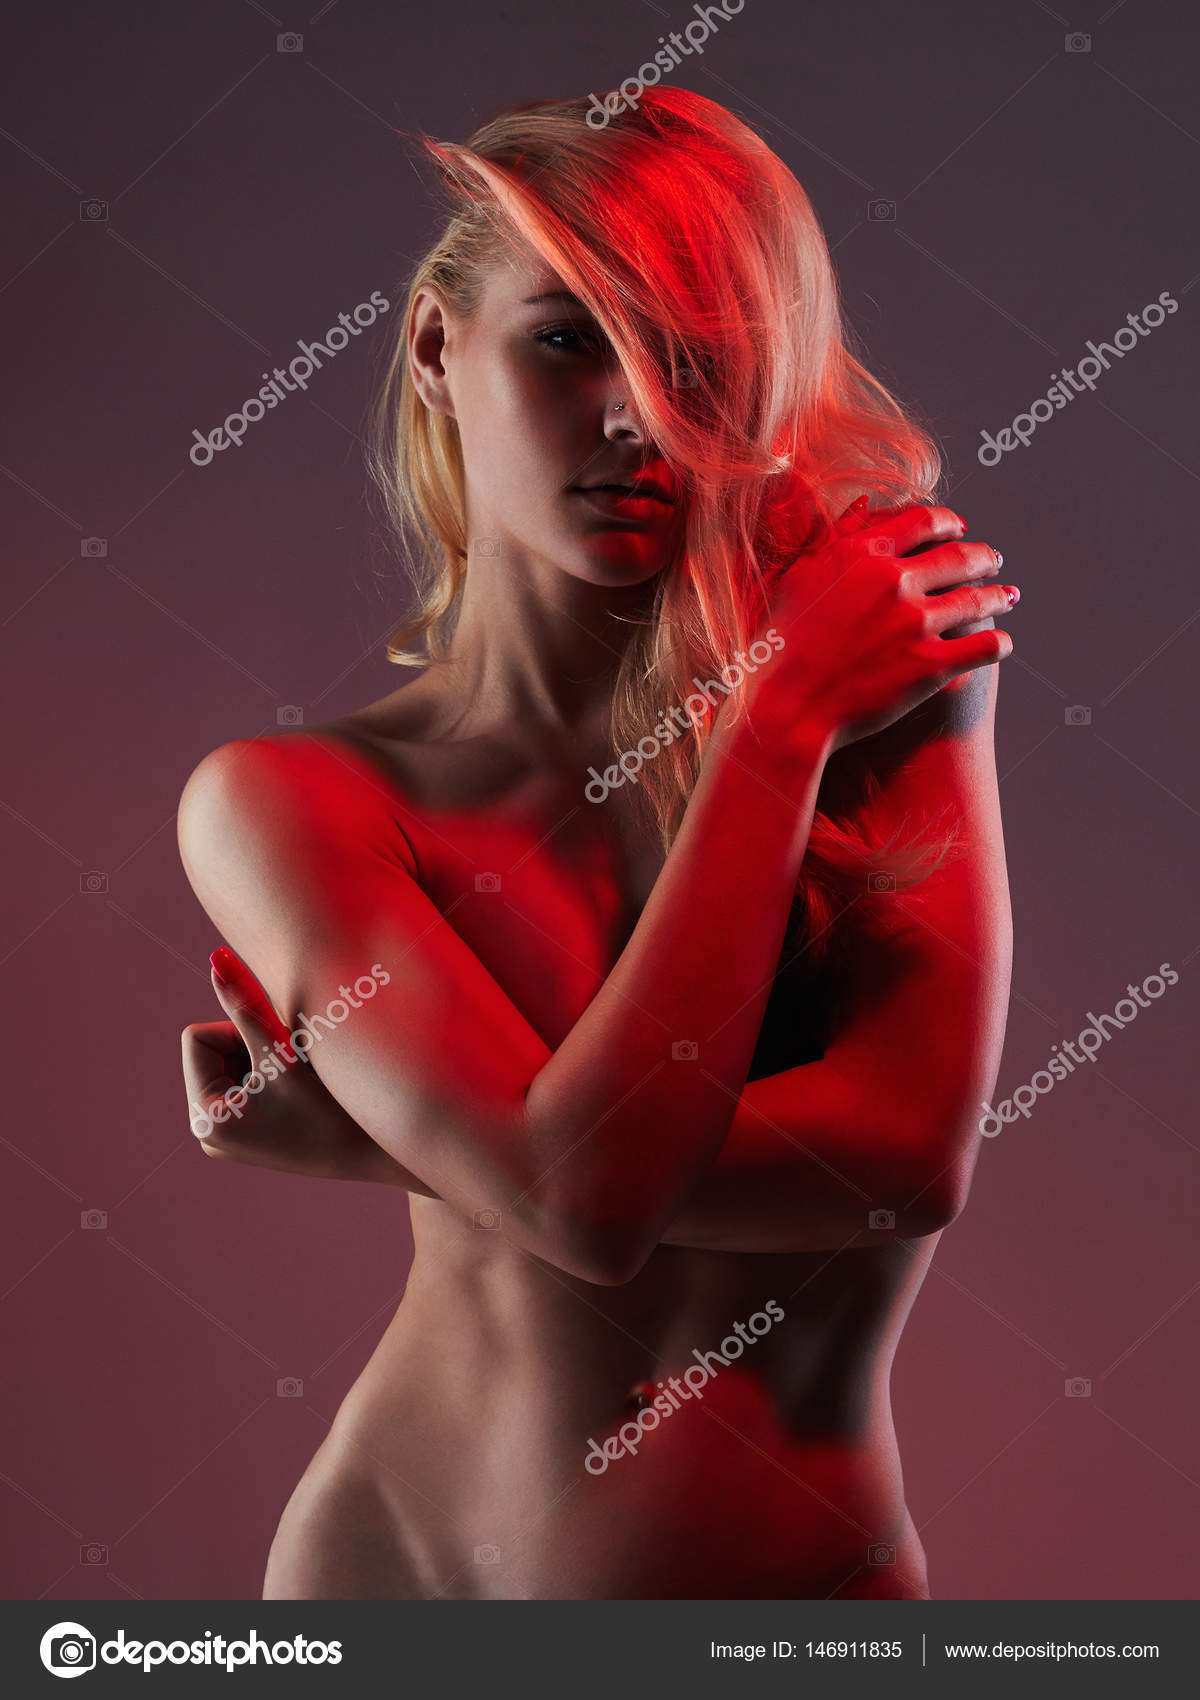 Red nude the woman in 